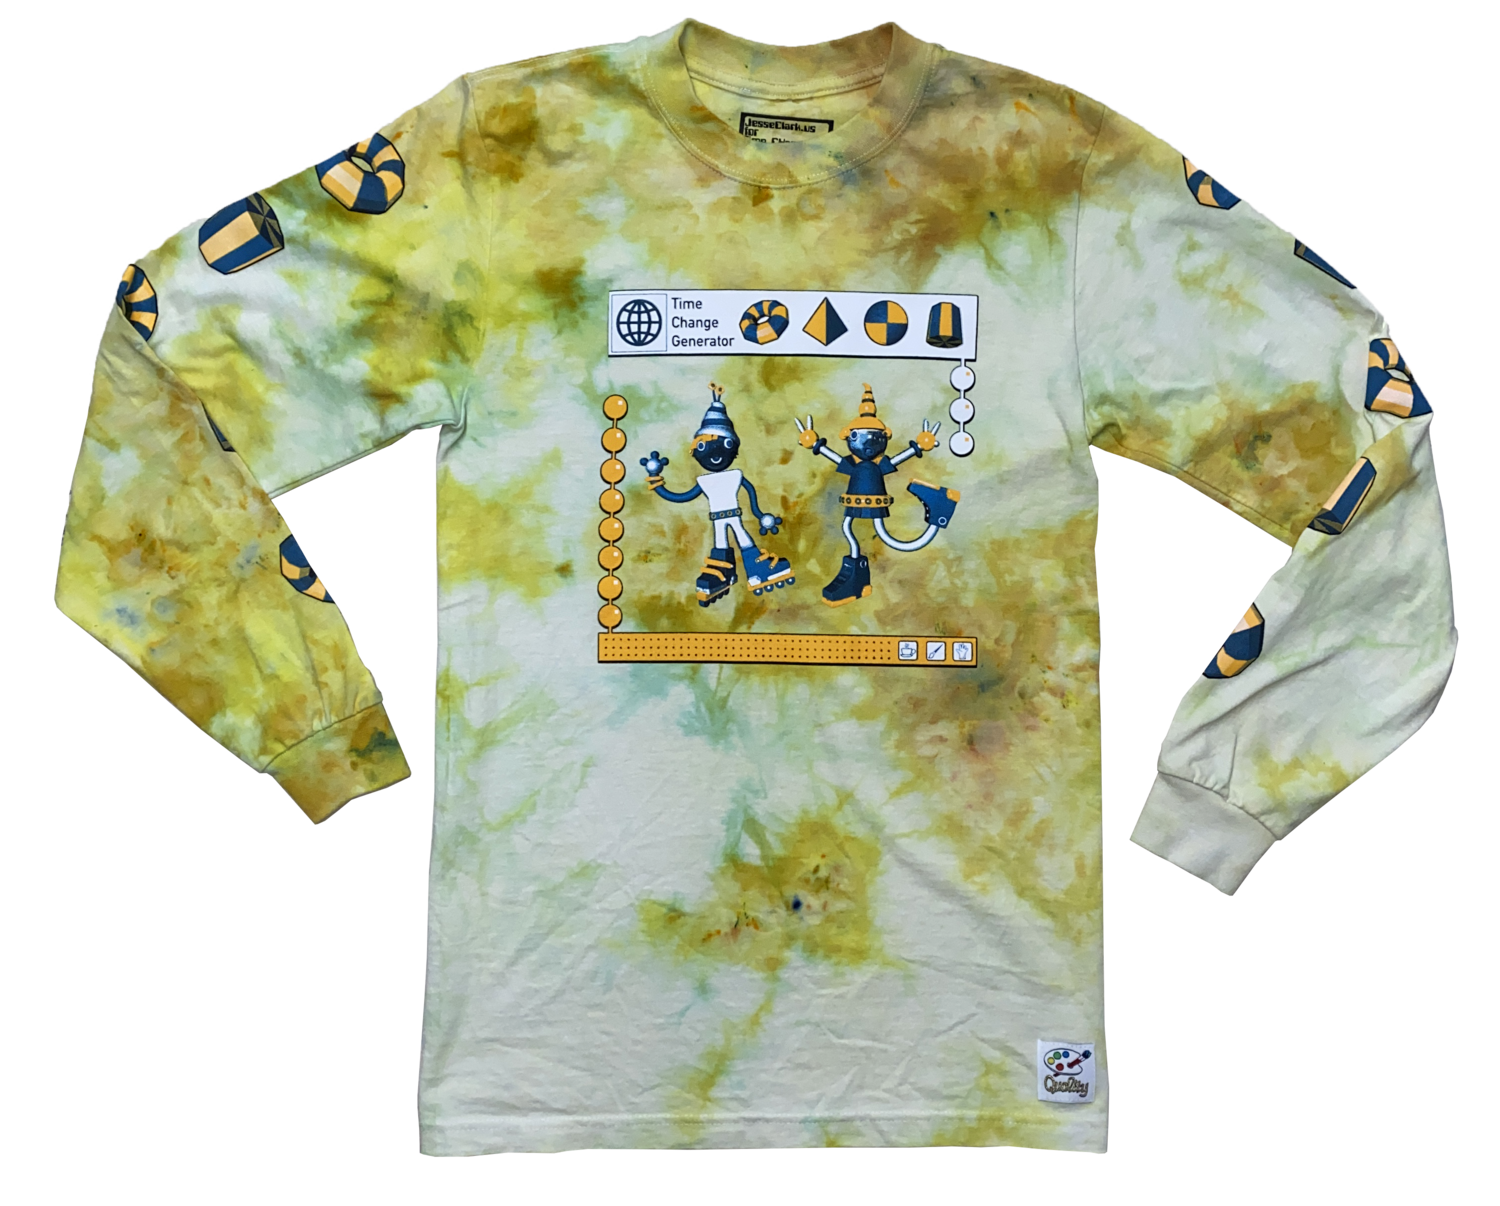 Long-sleeve green and yellow tie-dye Tee with 3D graphics on the chest and sleeves